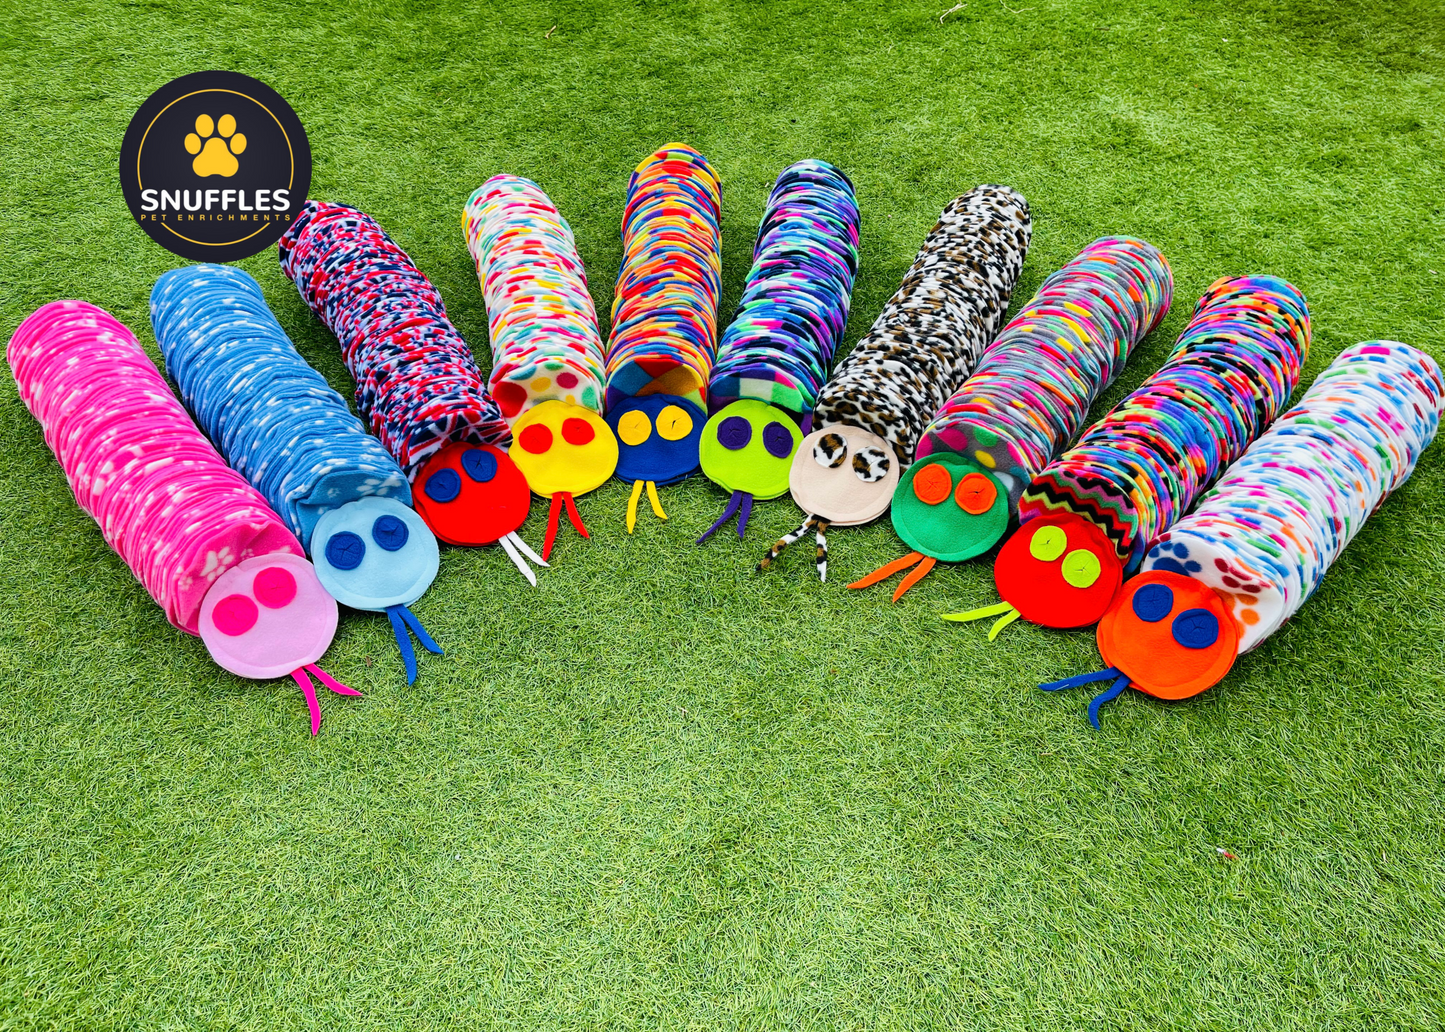 Small Snuffle Snake For Dogs And Small Pets , 10 colour options available